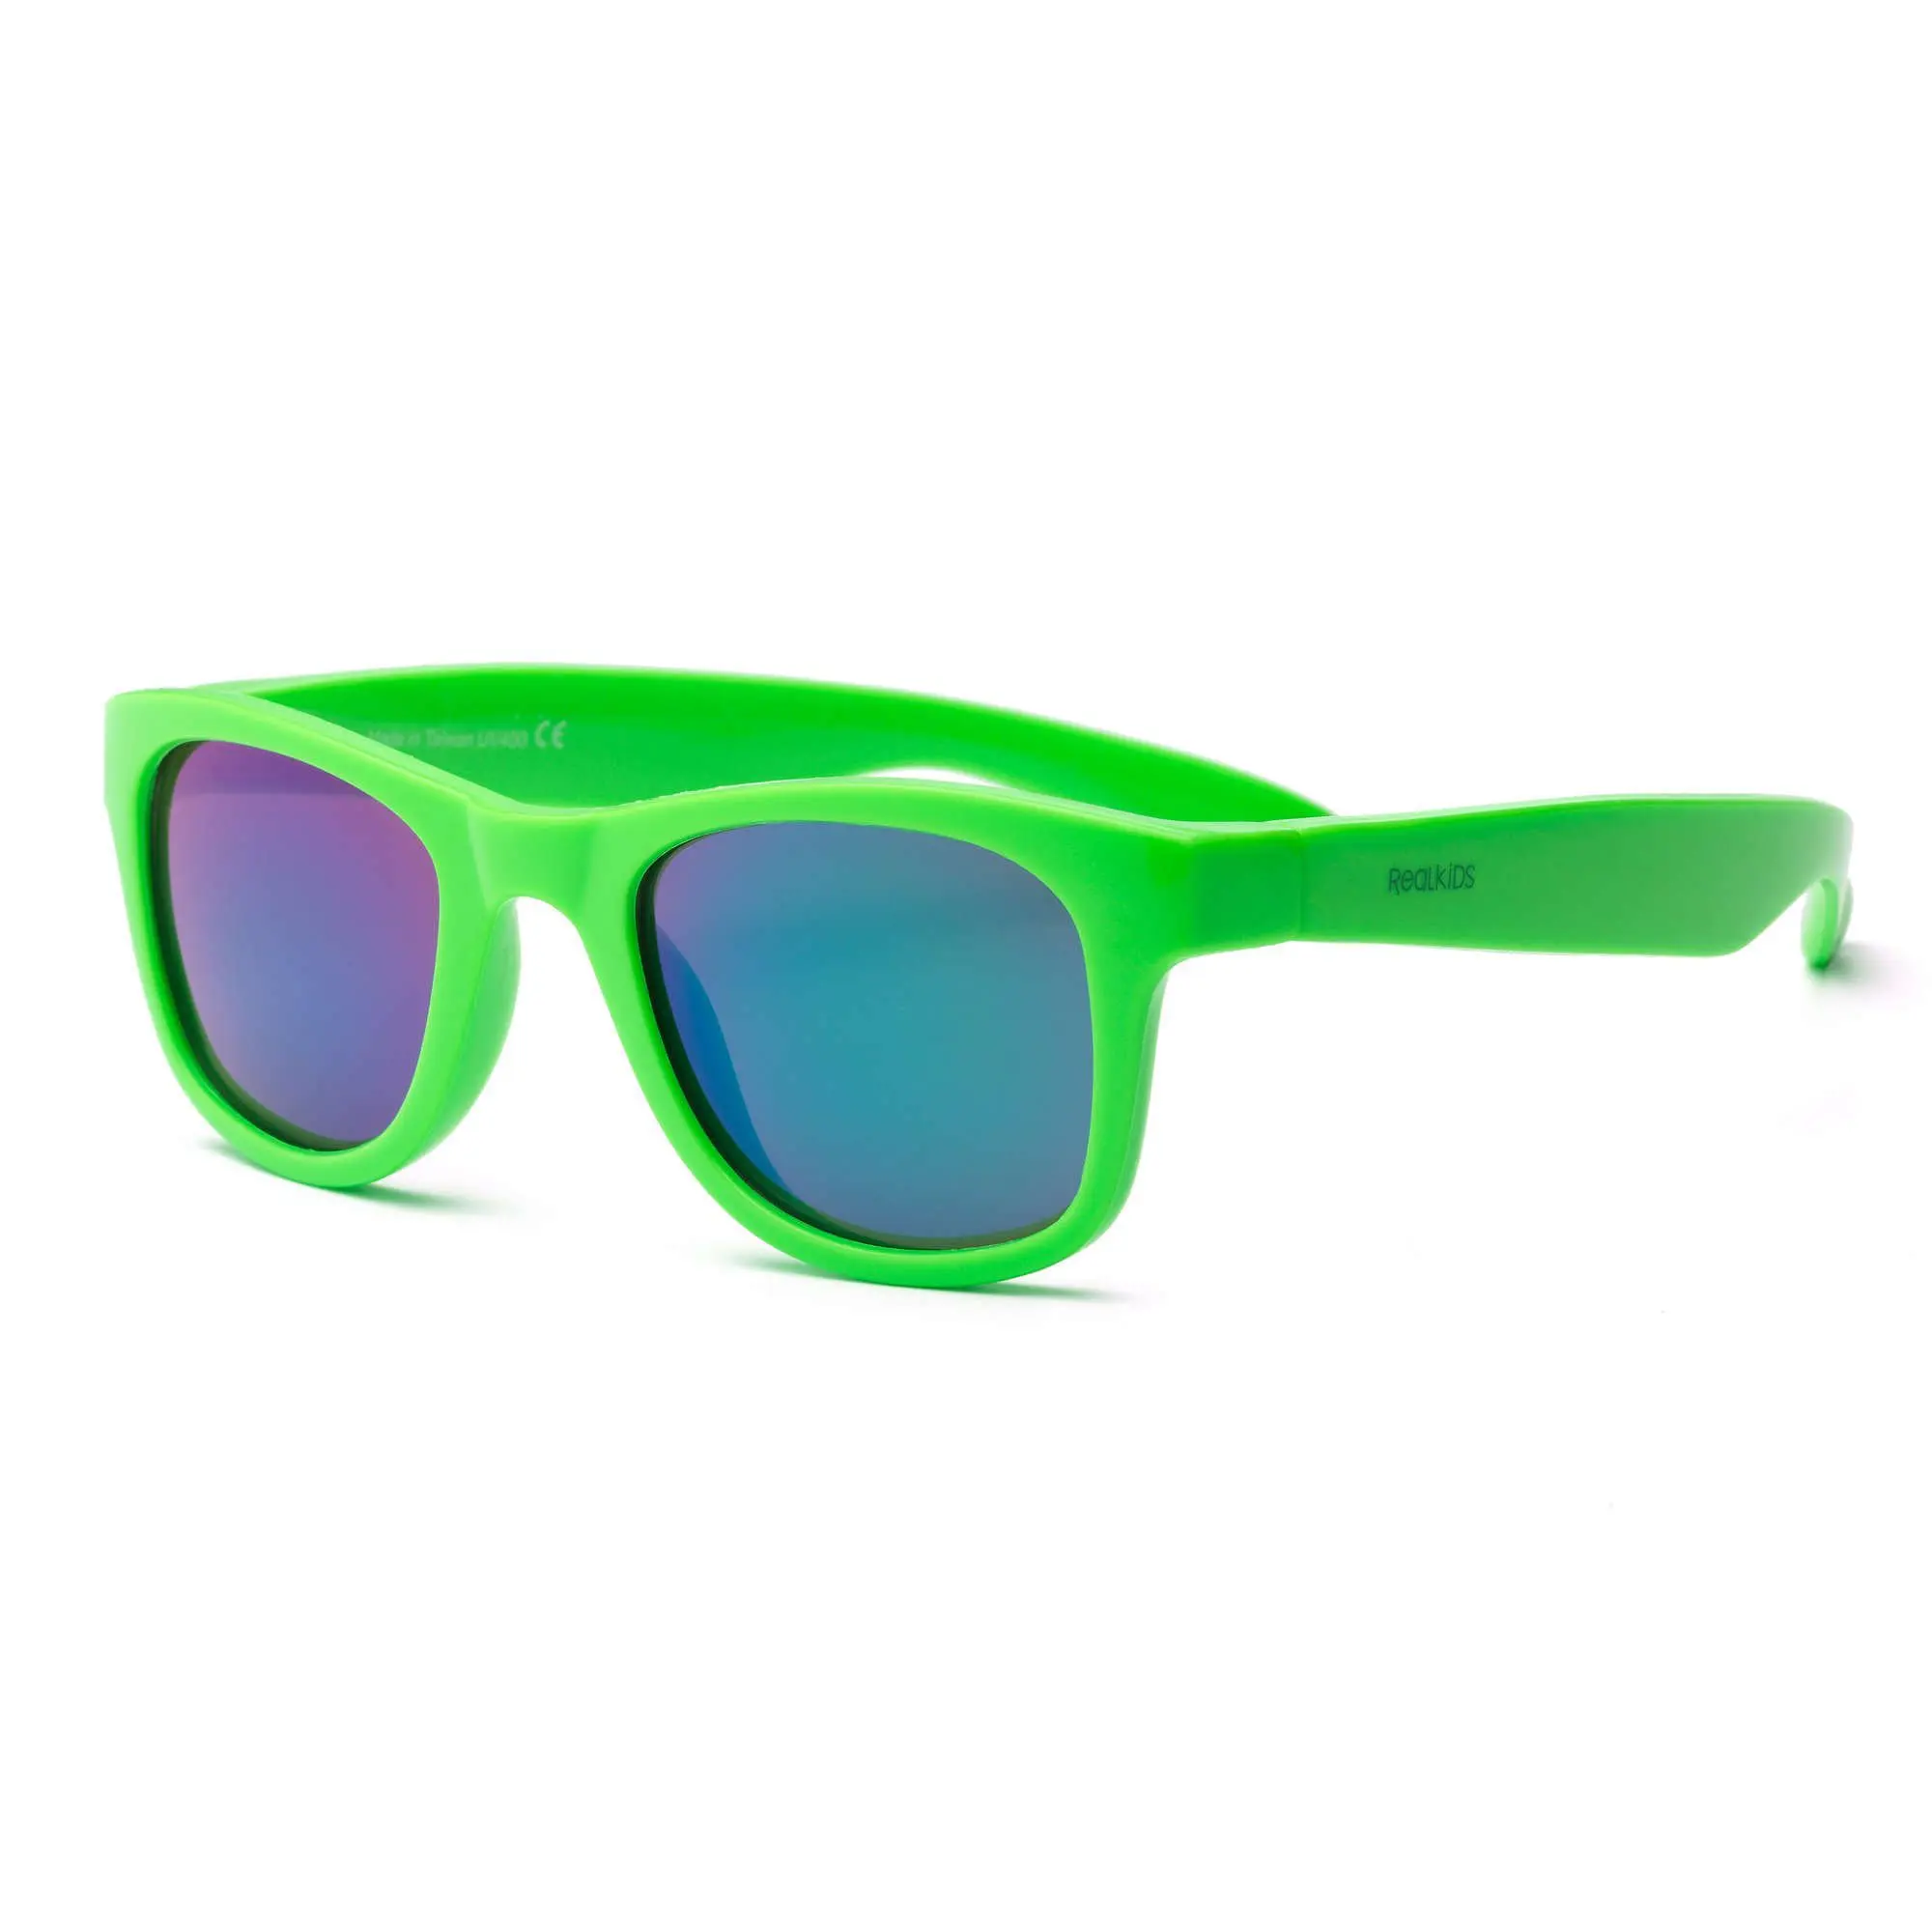 Share more than 155 toy sunglasses latest